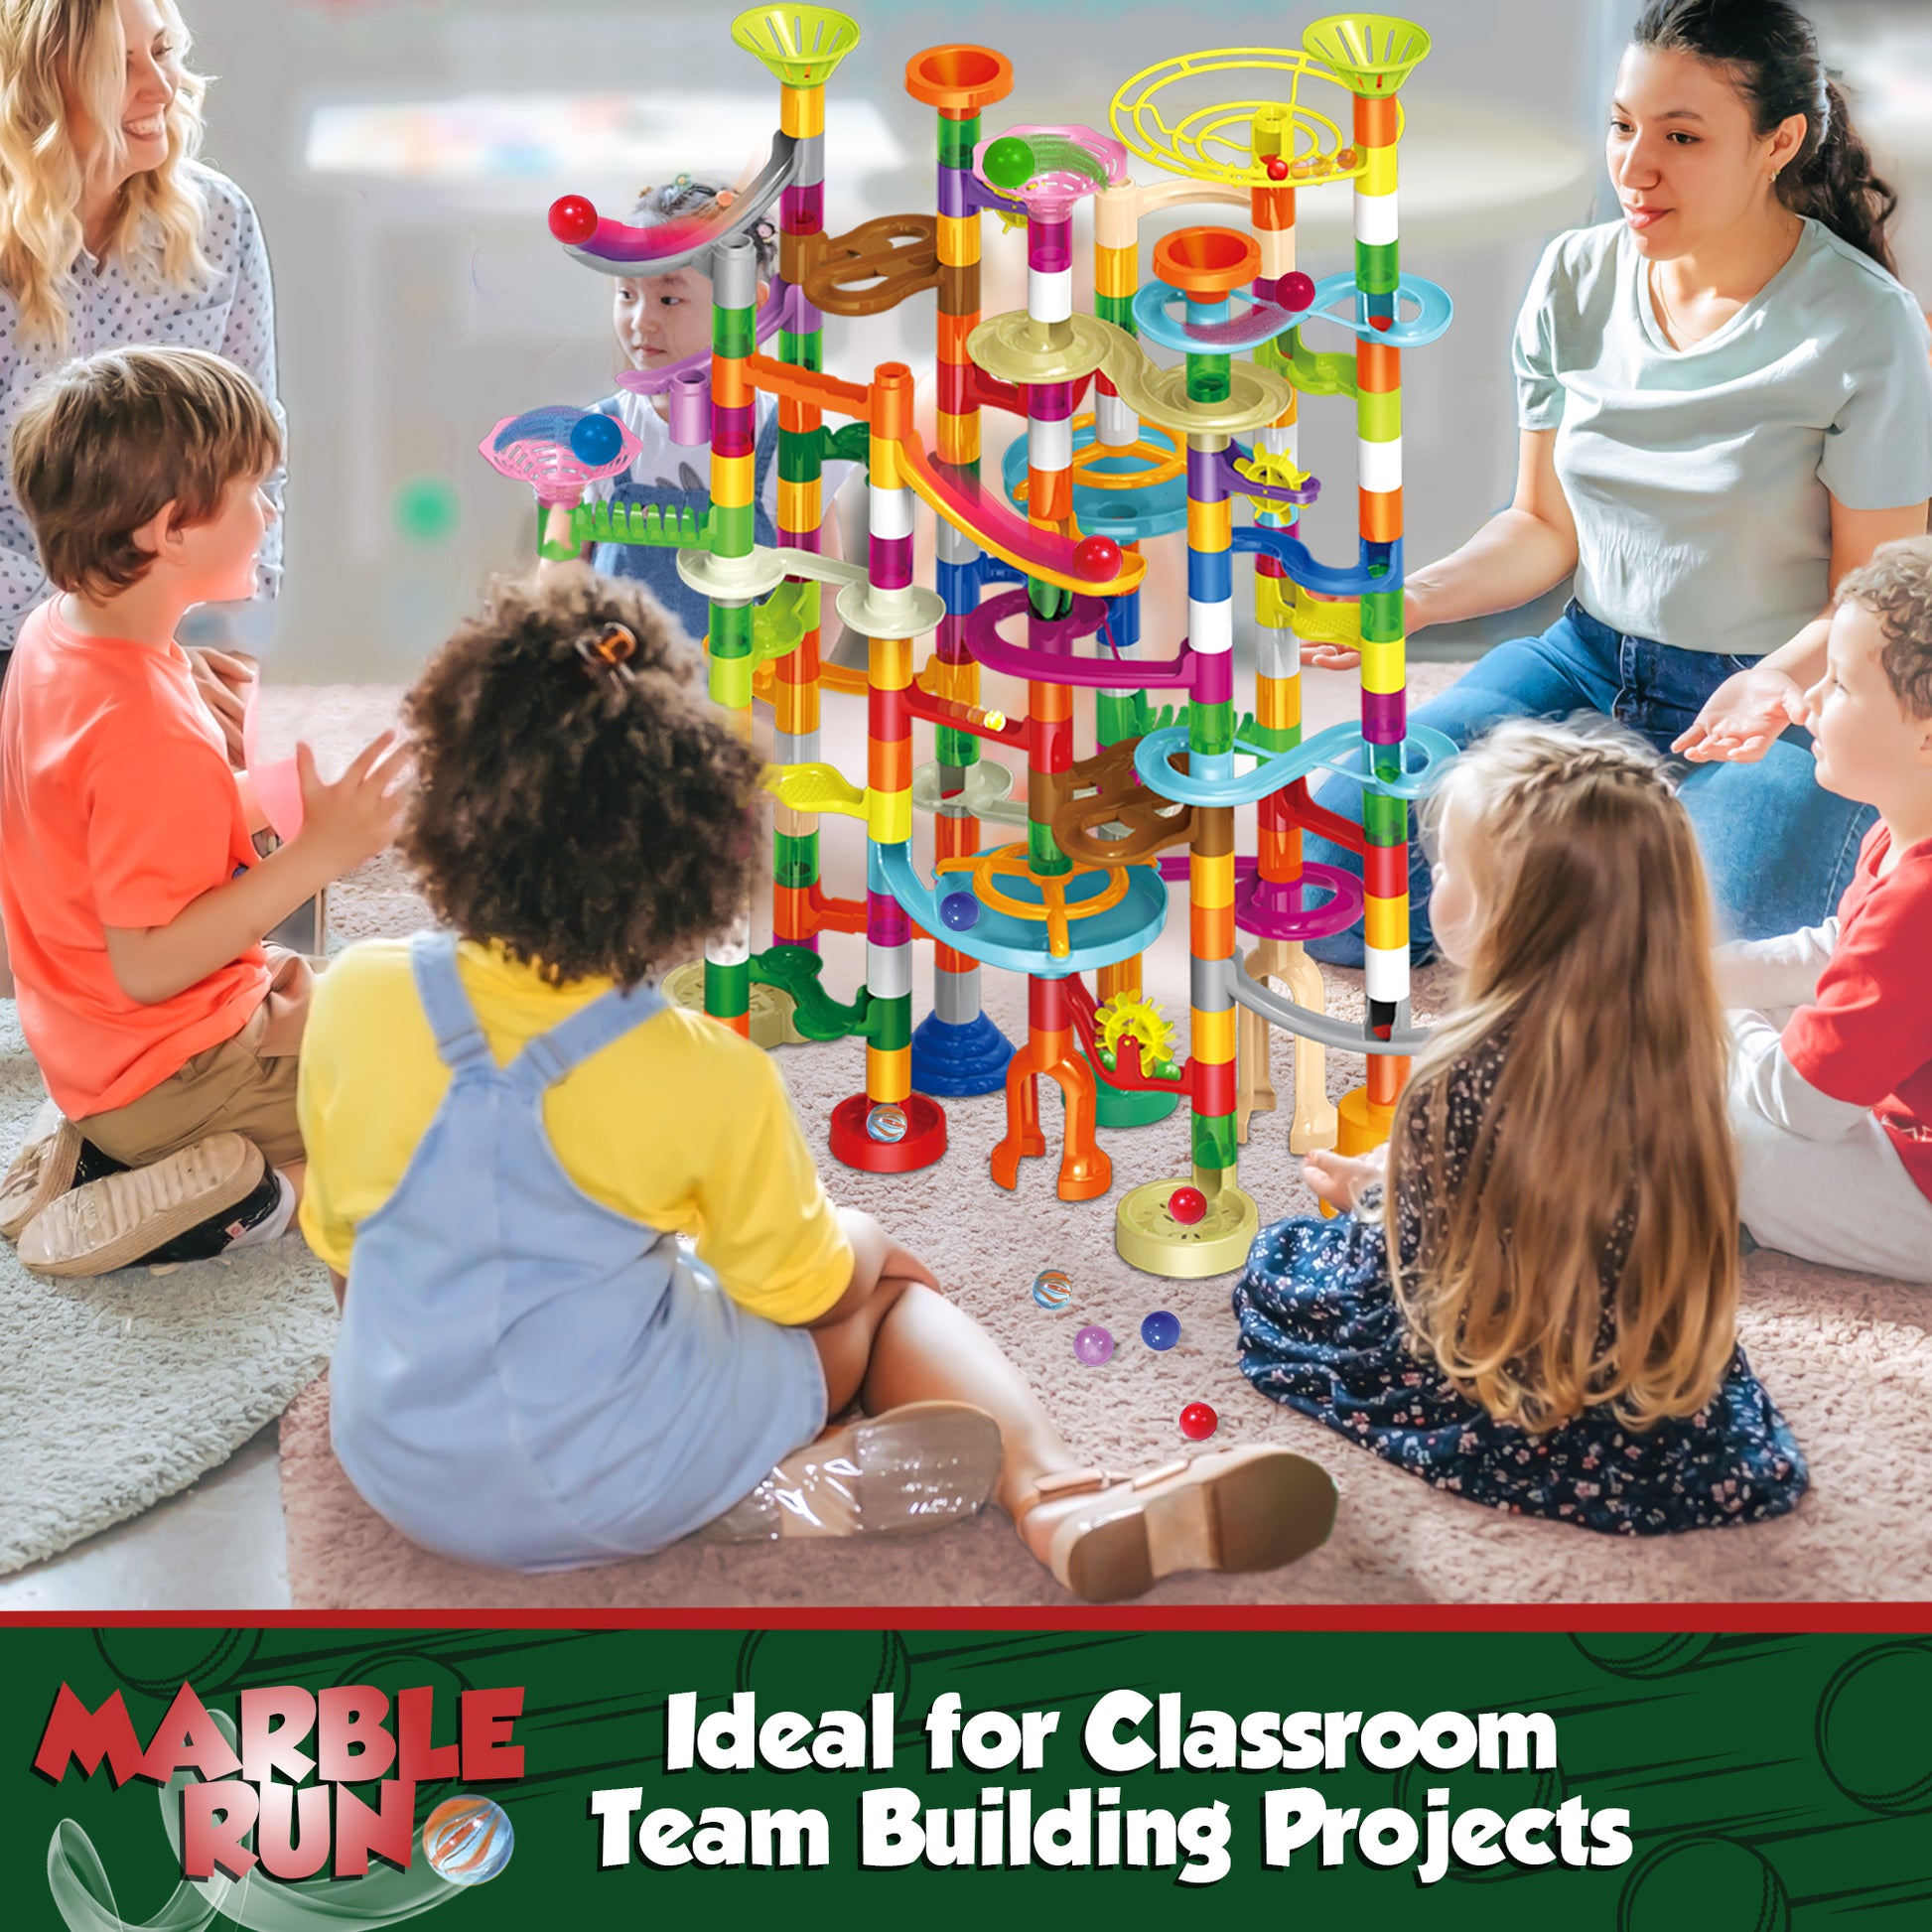 Marble Fun Toy Set for Children